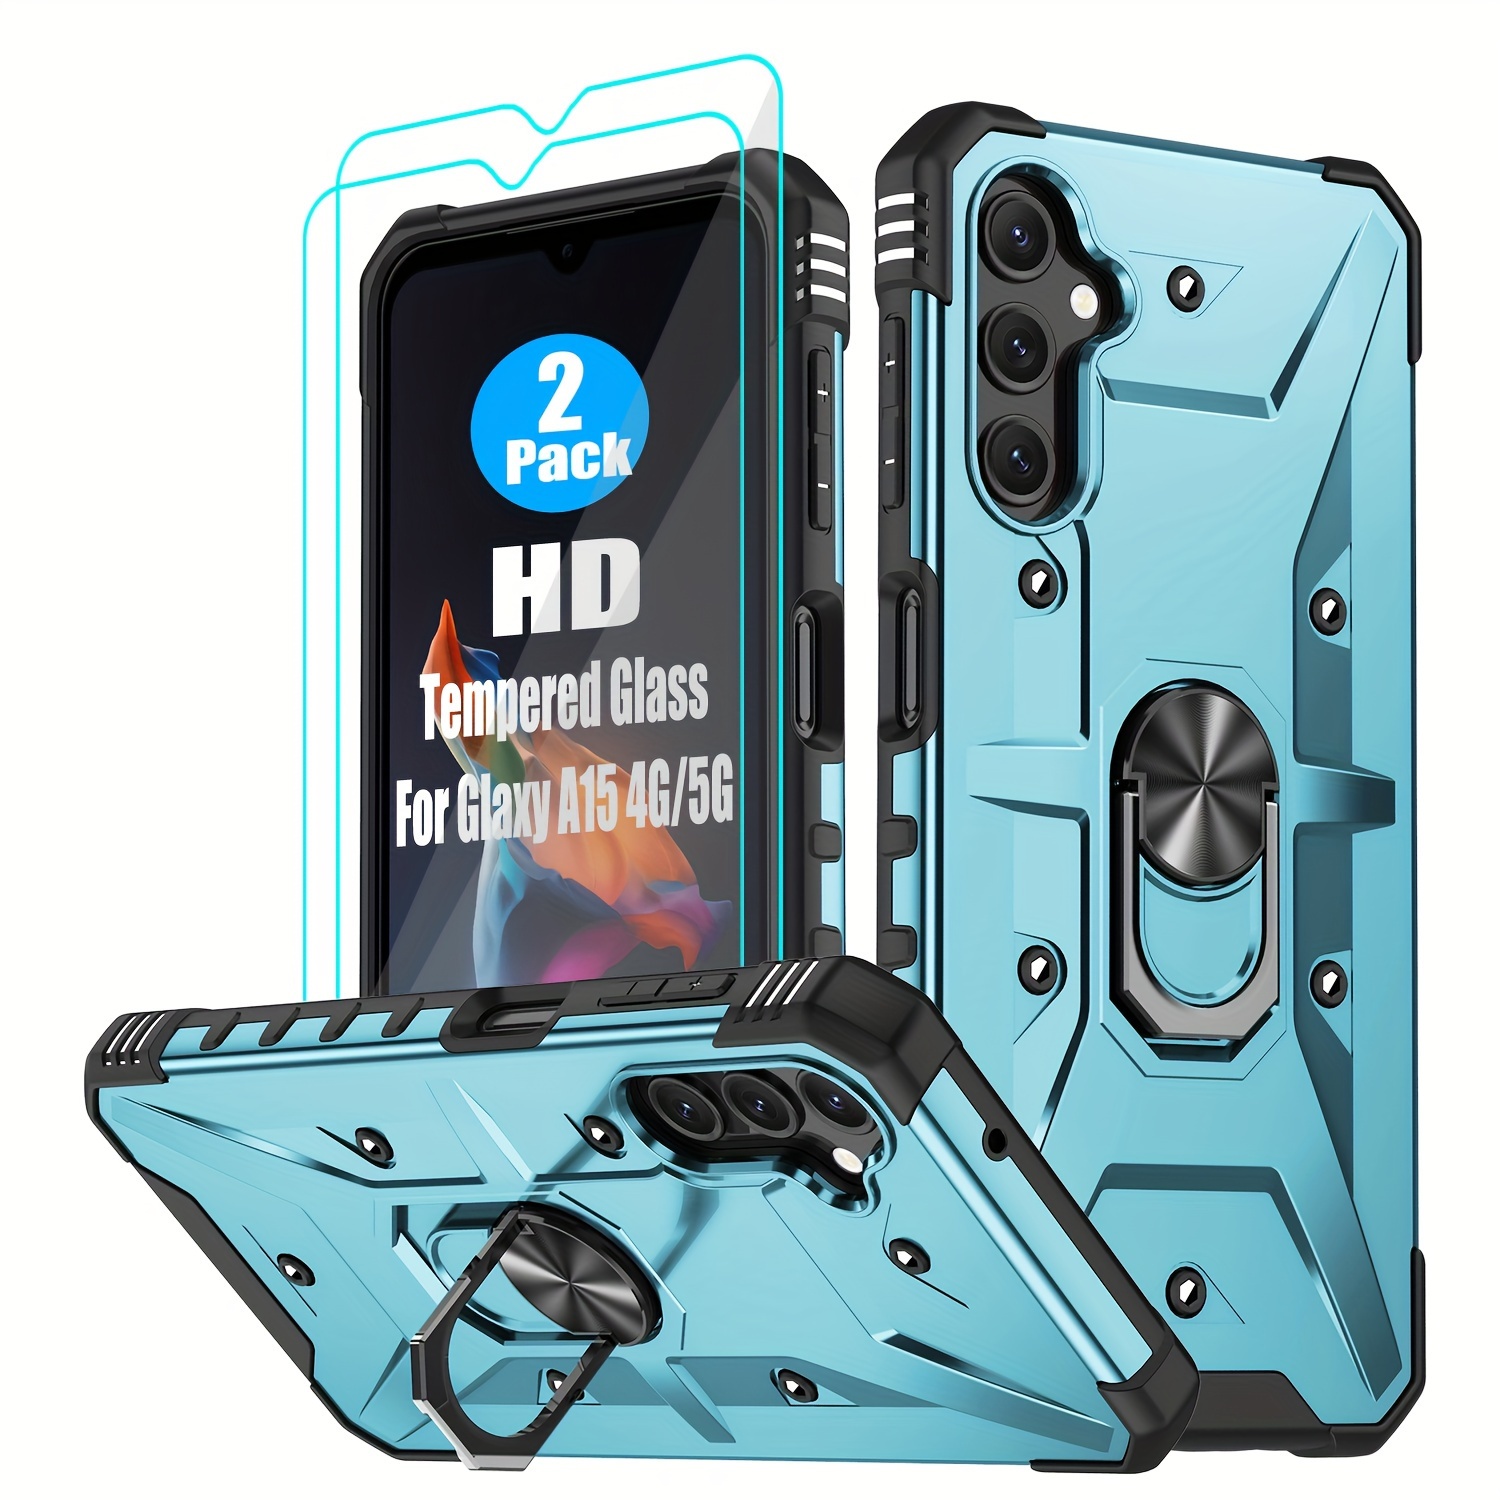 

Jcuegrny Hybrid Heavy-duty Shockproof Case For Samsung Galaxy A15 4g/5g With Built-in Stand And 2-piece Hd Tempered Glass Screen Protectors